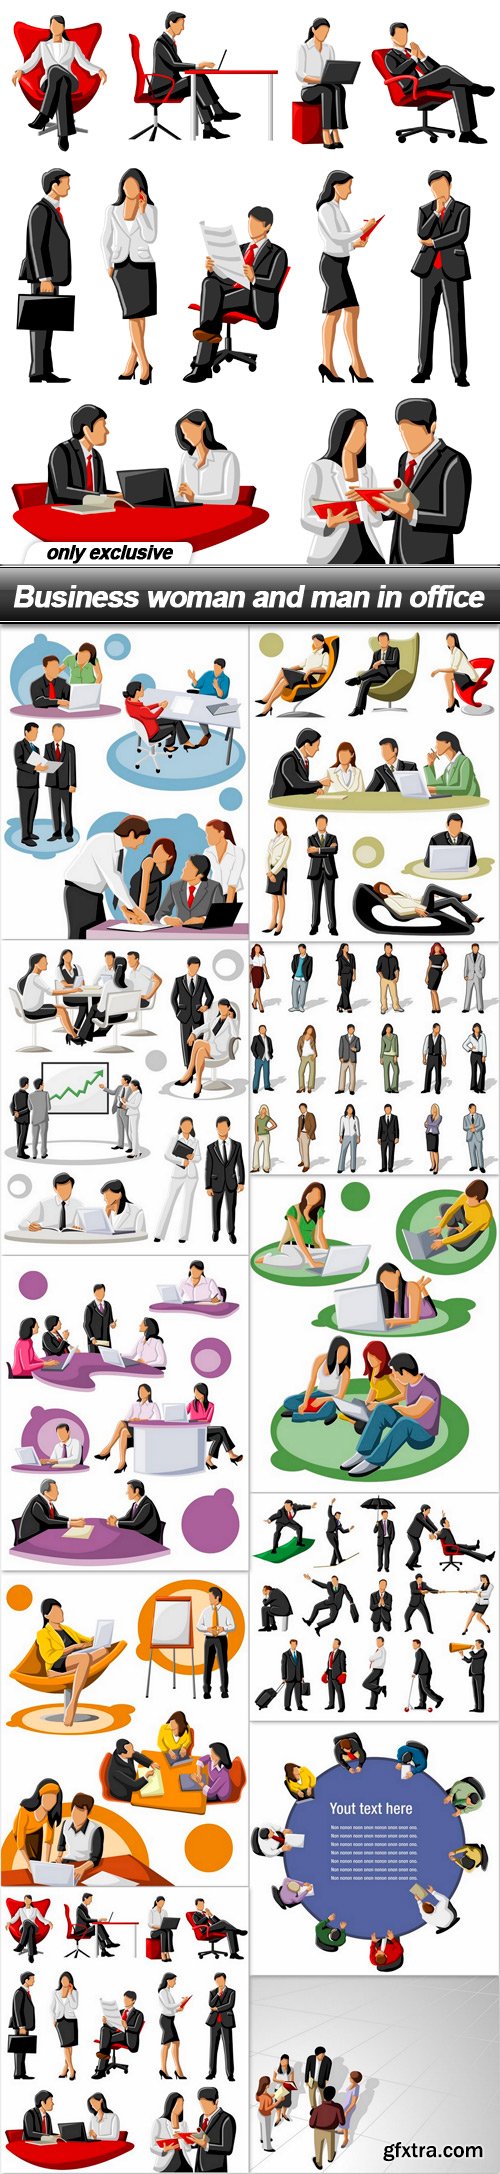 Business woman and man in office - 11 EPS